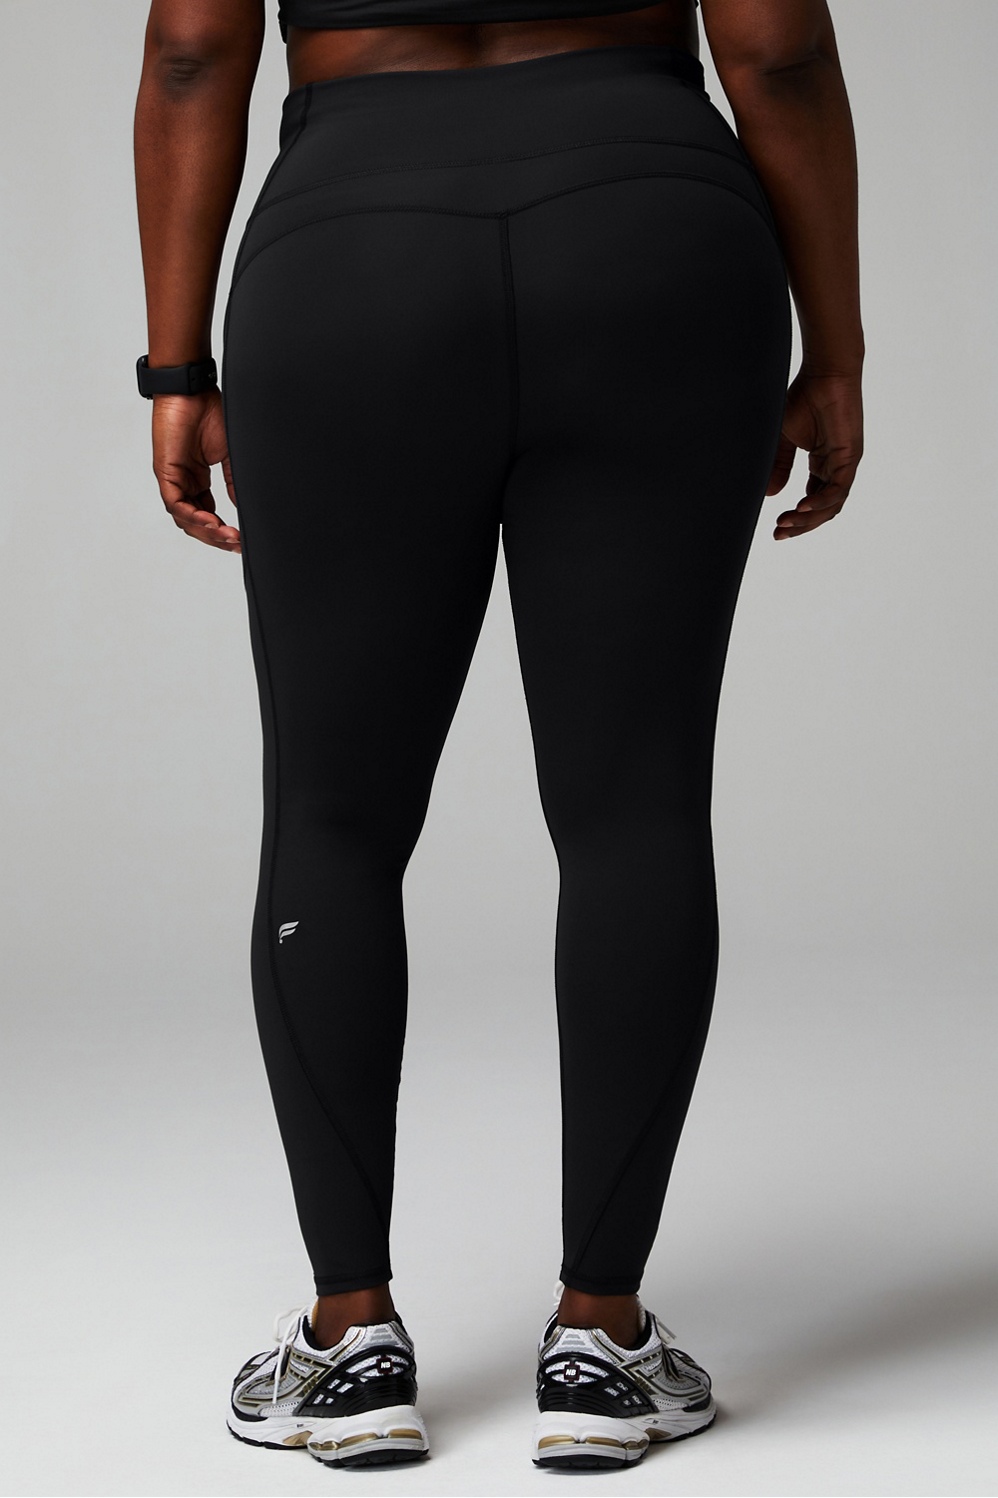 Fabletics Oasis High-Waisted Legging Womens Chestnut plus Size 4X